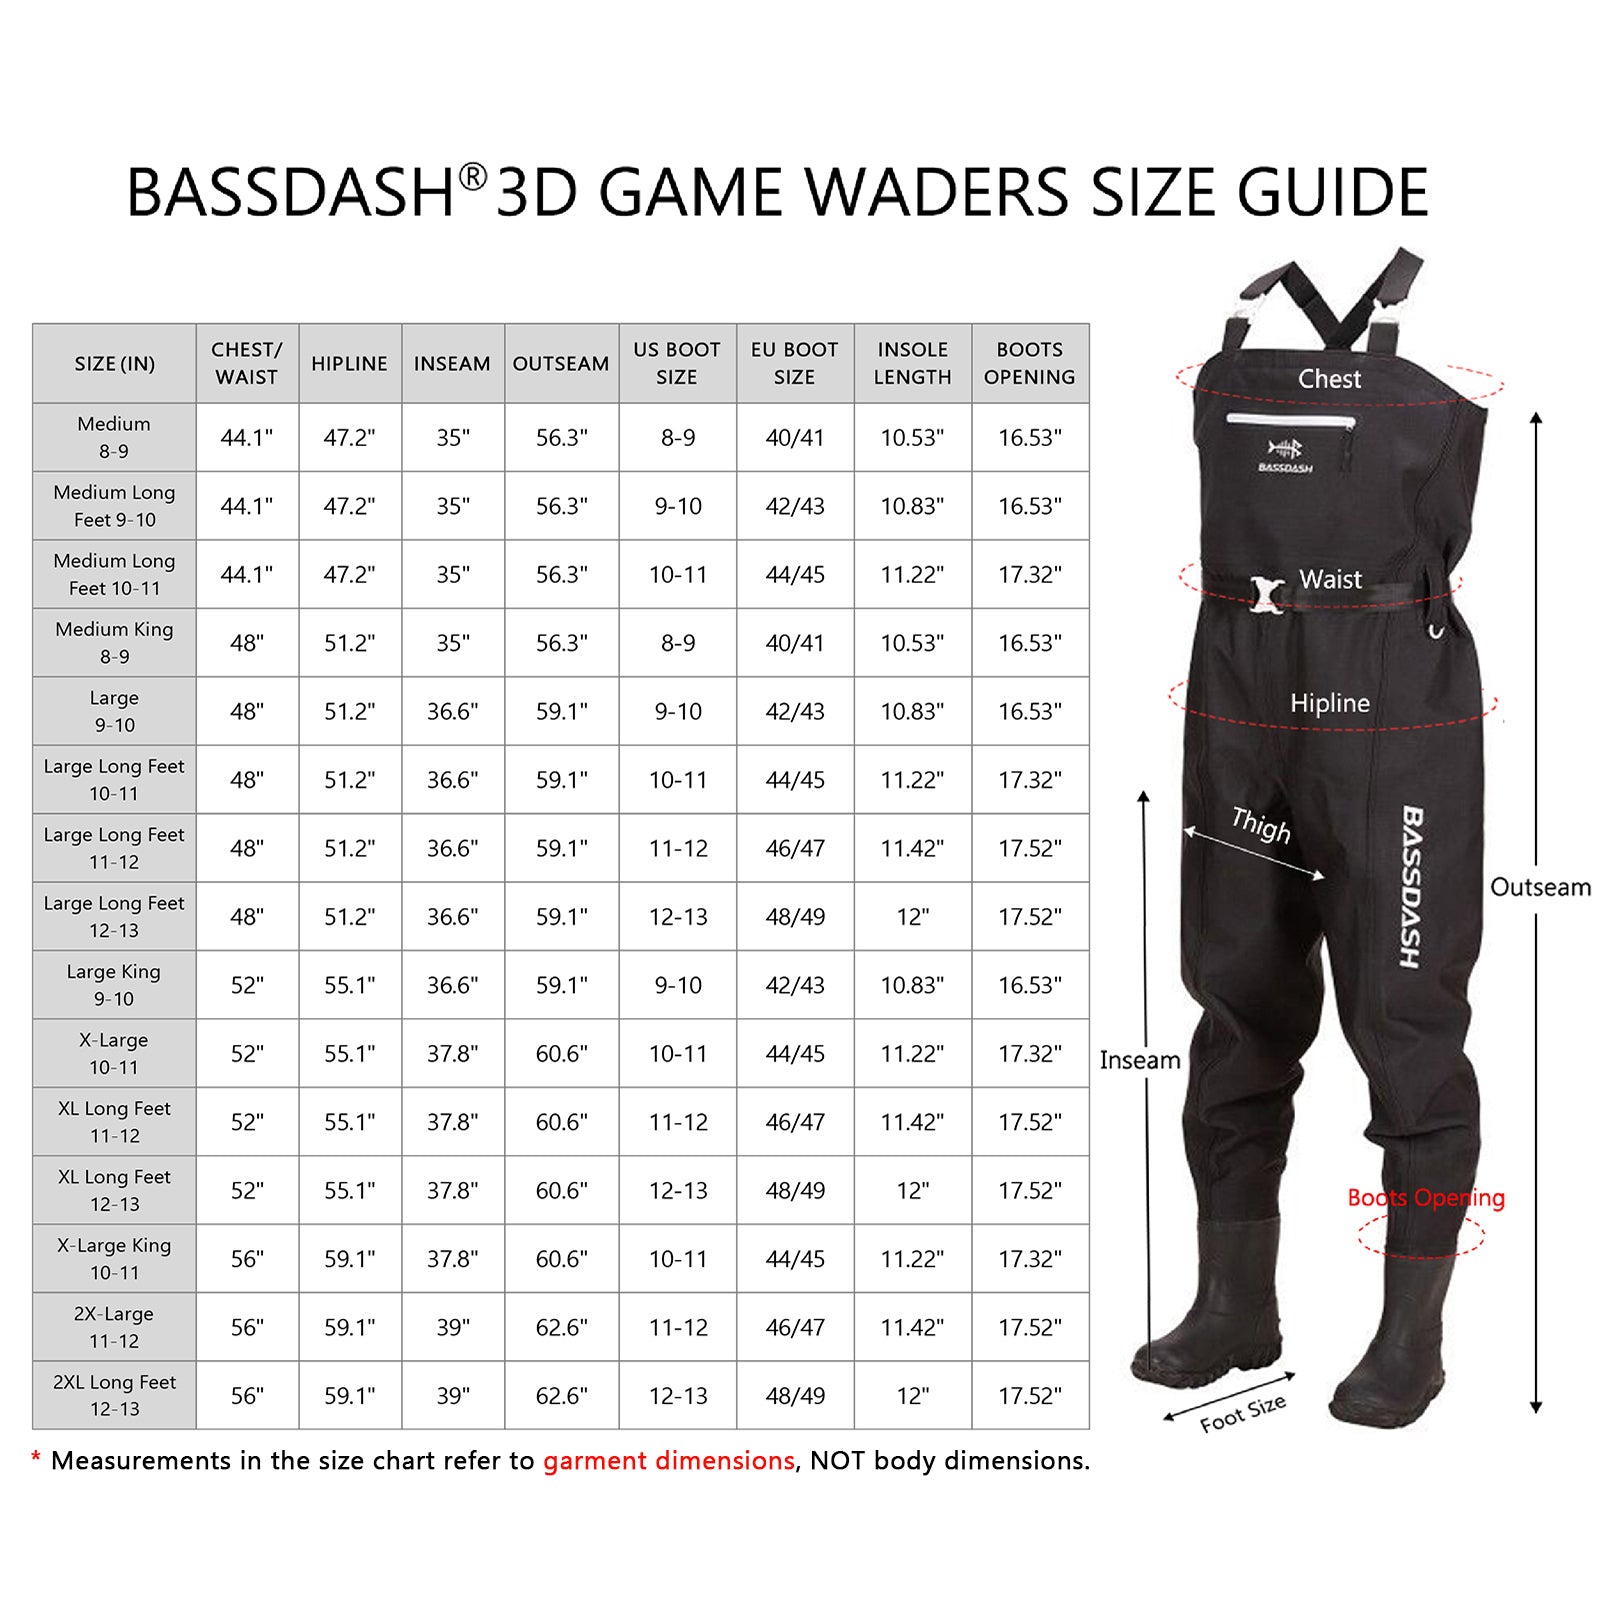 Bassdash Men’s Breathable Chest and Waist Convertible Waders for Fishing Hunting, Stocking Foot and Boot Foot Waders, Large King